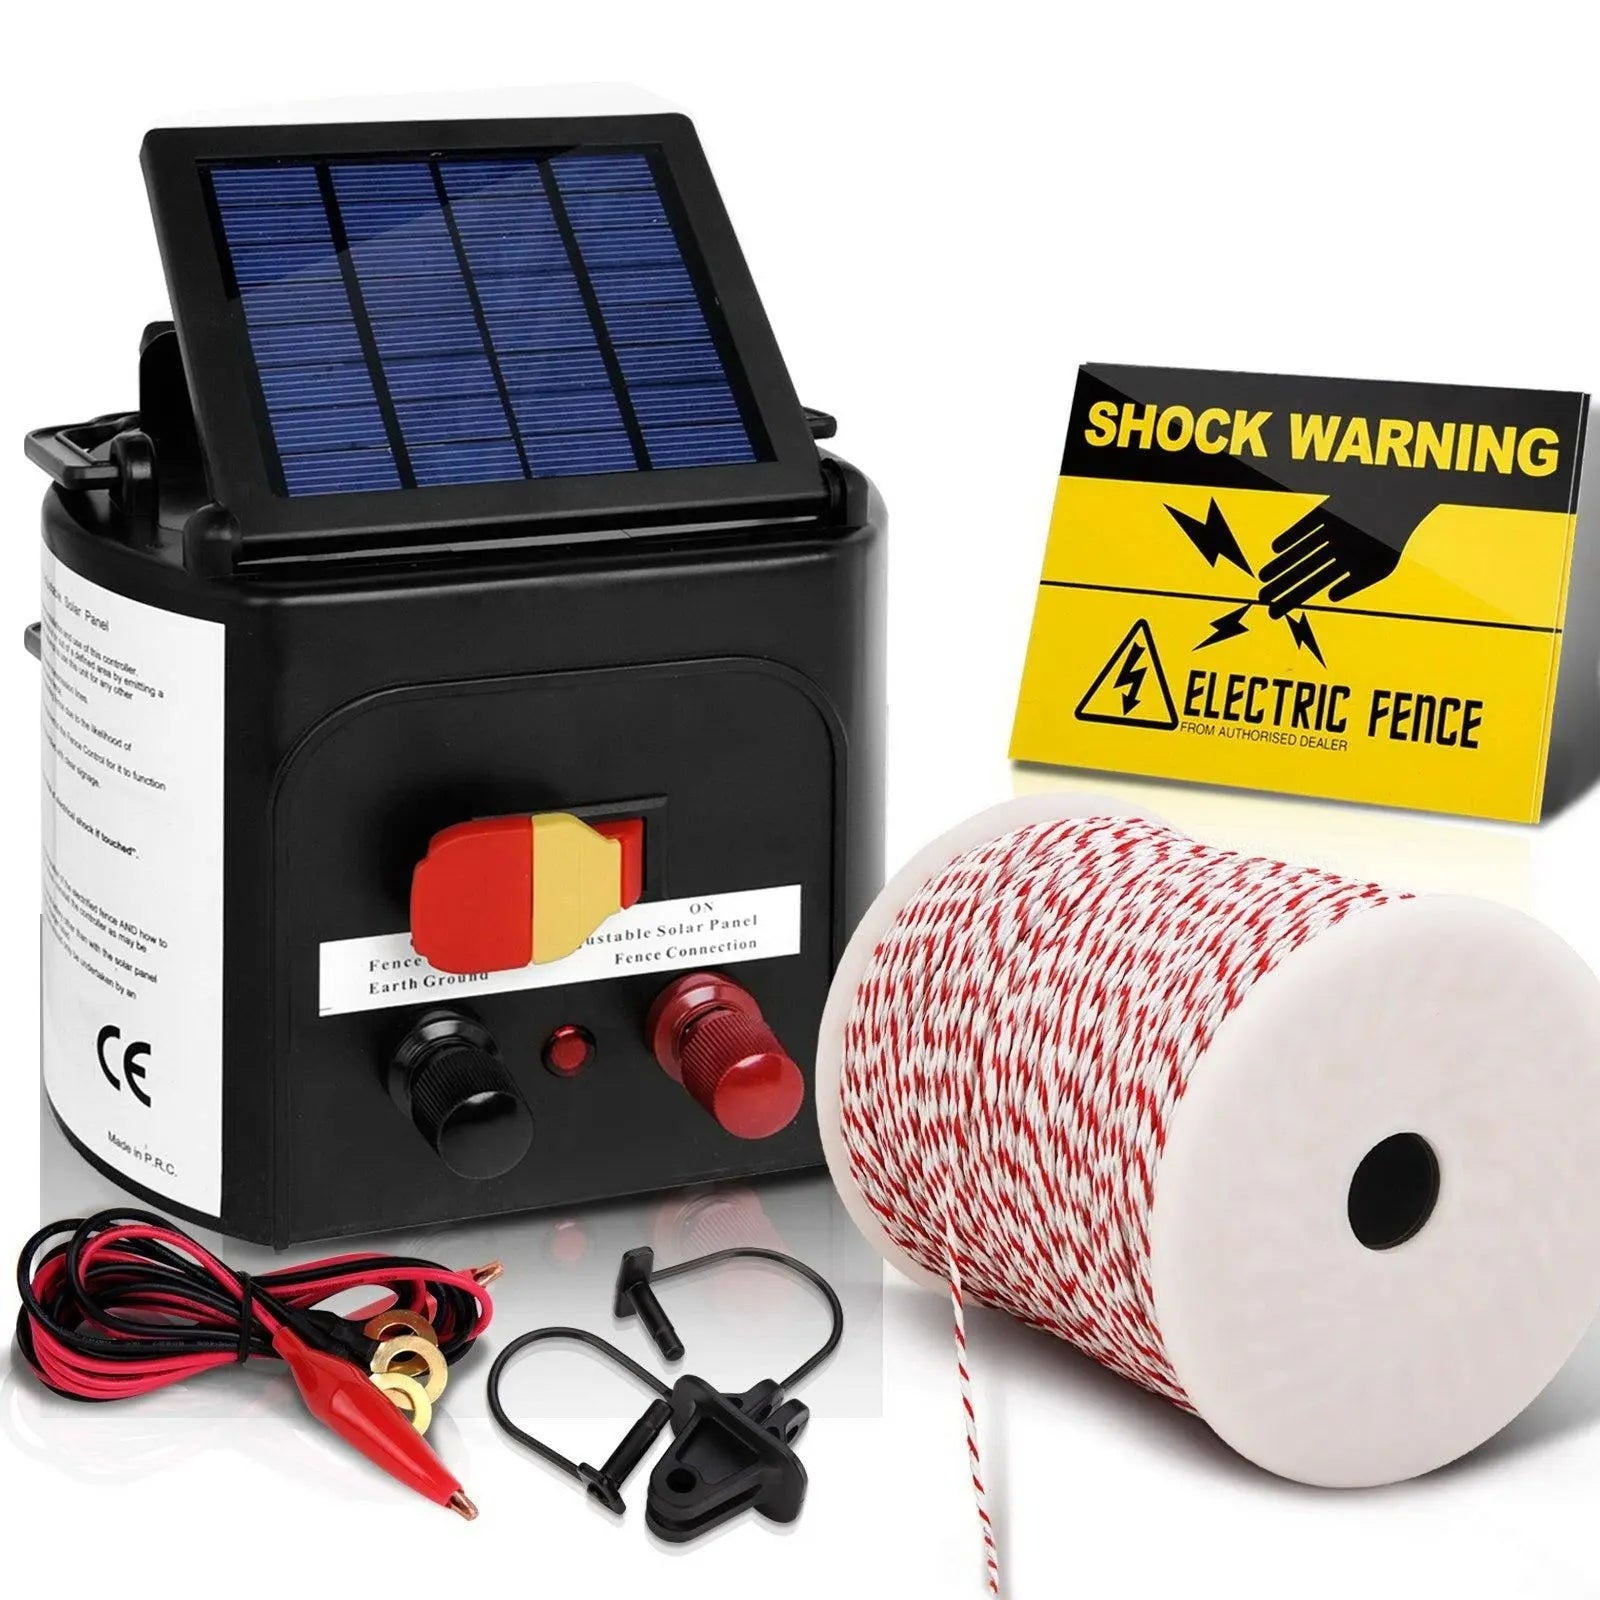 Giantz 5km Solar Electric Fence Energiser Charger with 500M Tape and 25pcs Insulators Deals499